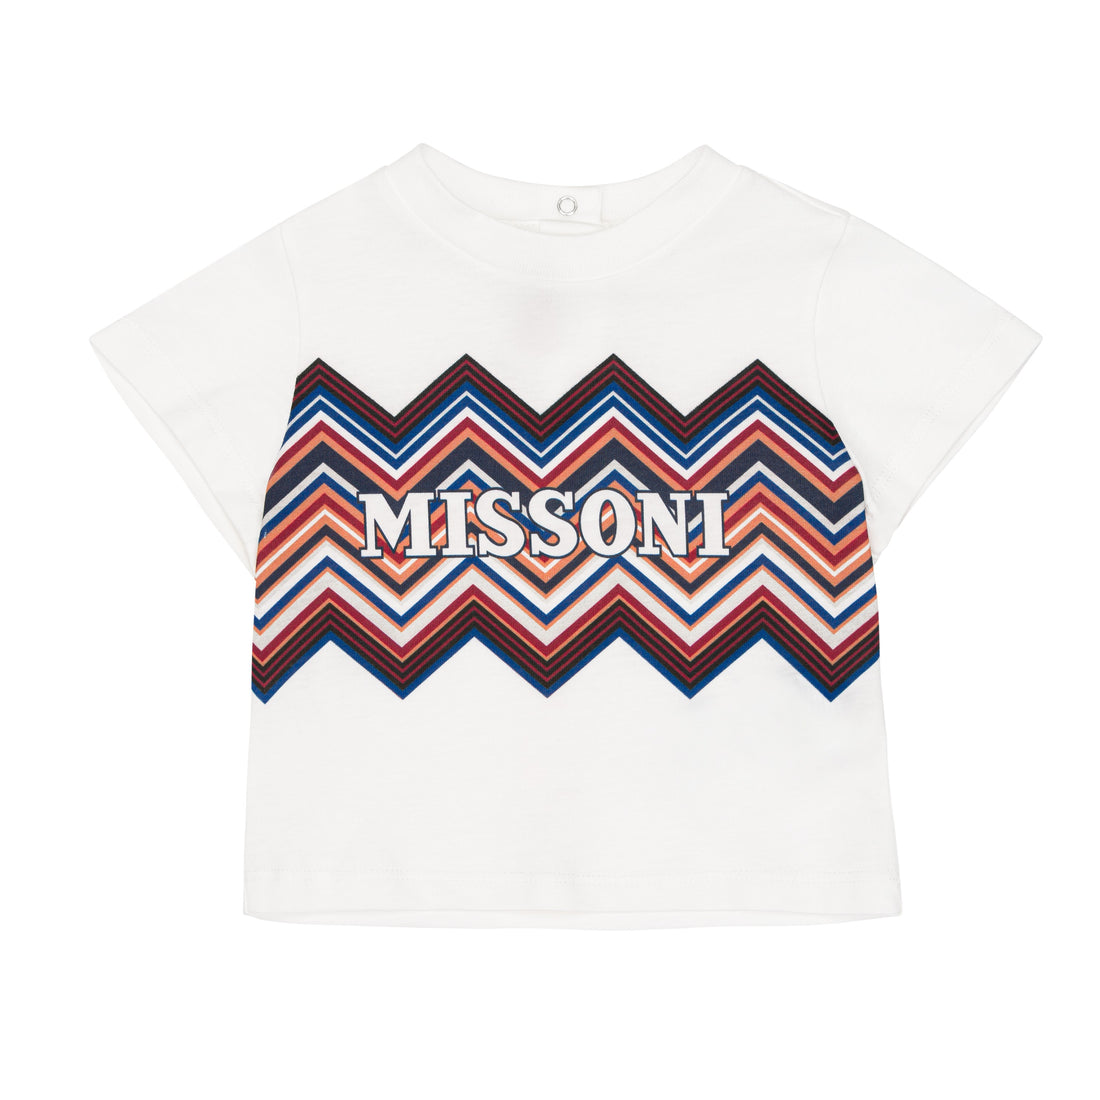 Timeless Missoni Cotton T-Shirt/Top | Schools Out